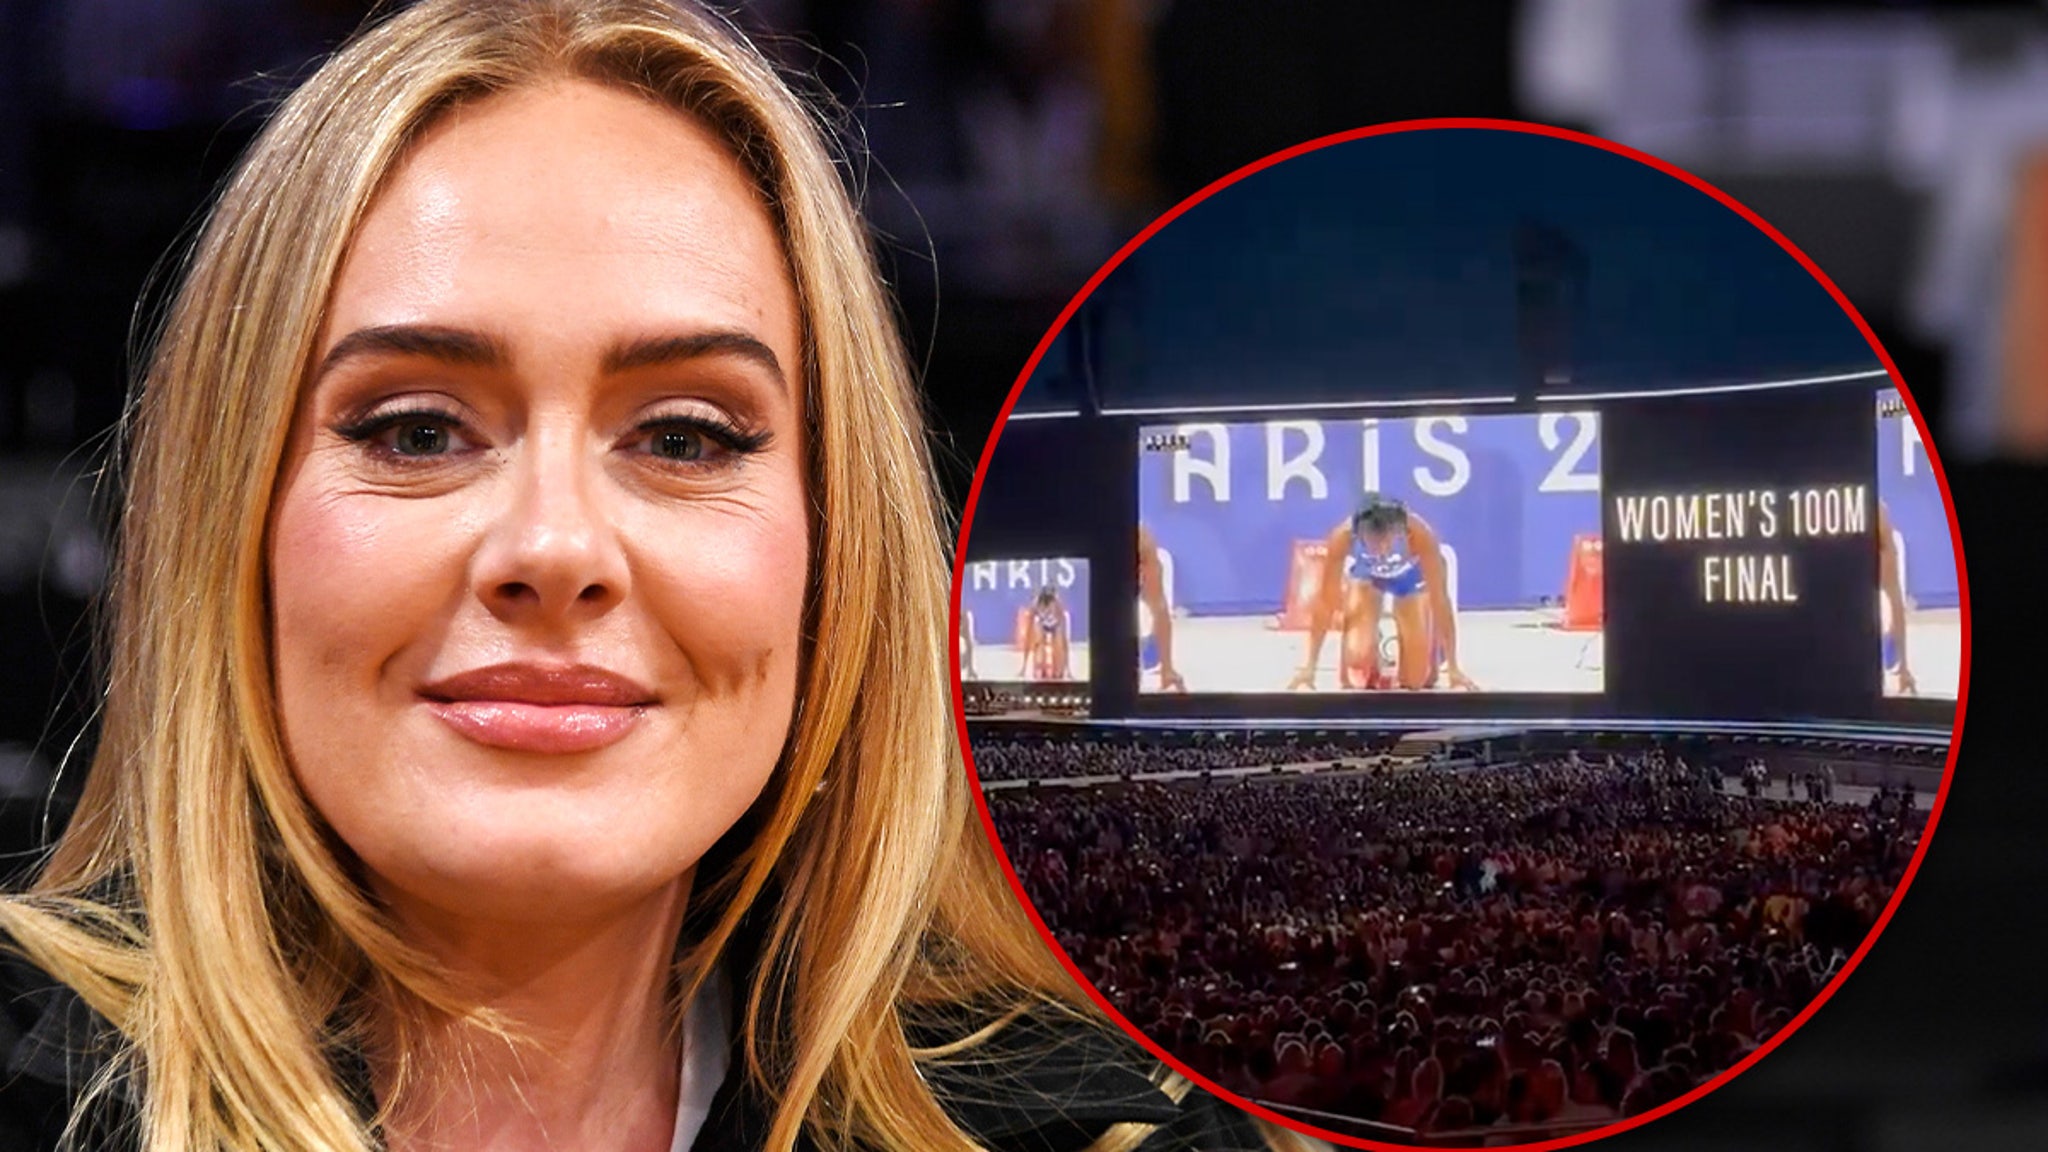 Adele Puts Munich Concert on Pause to Watch Women's 100M Final